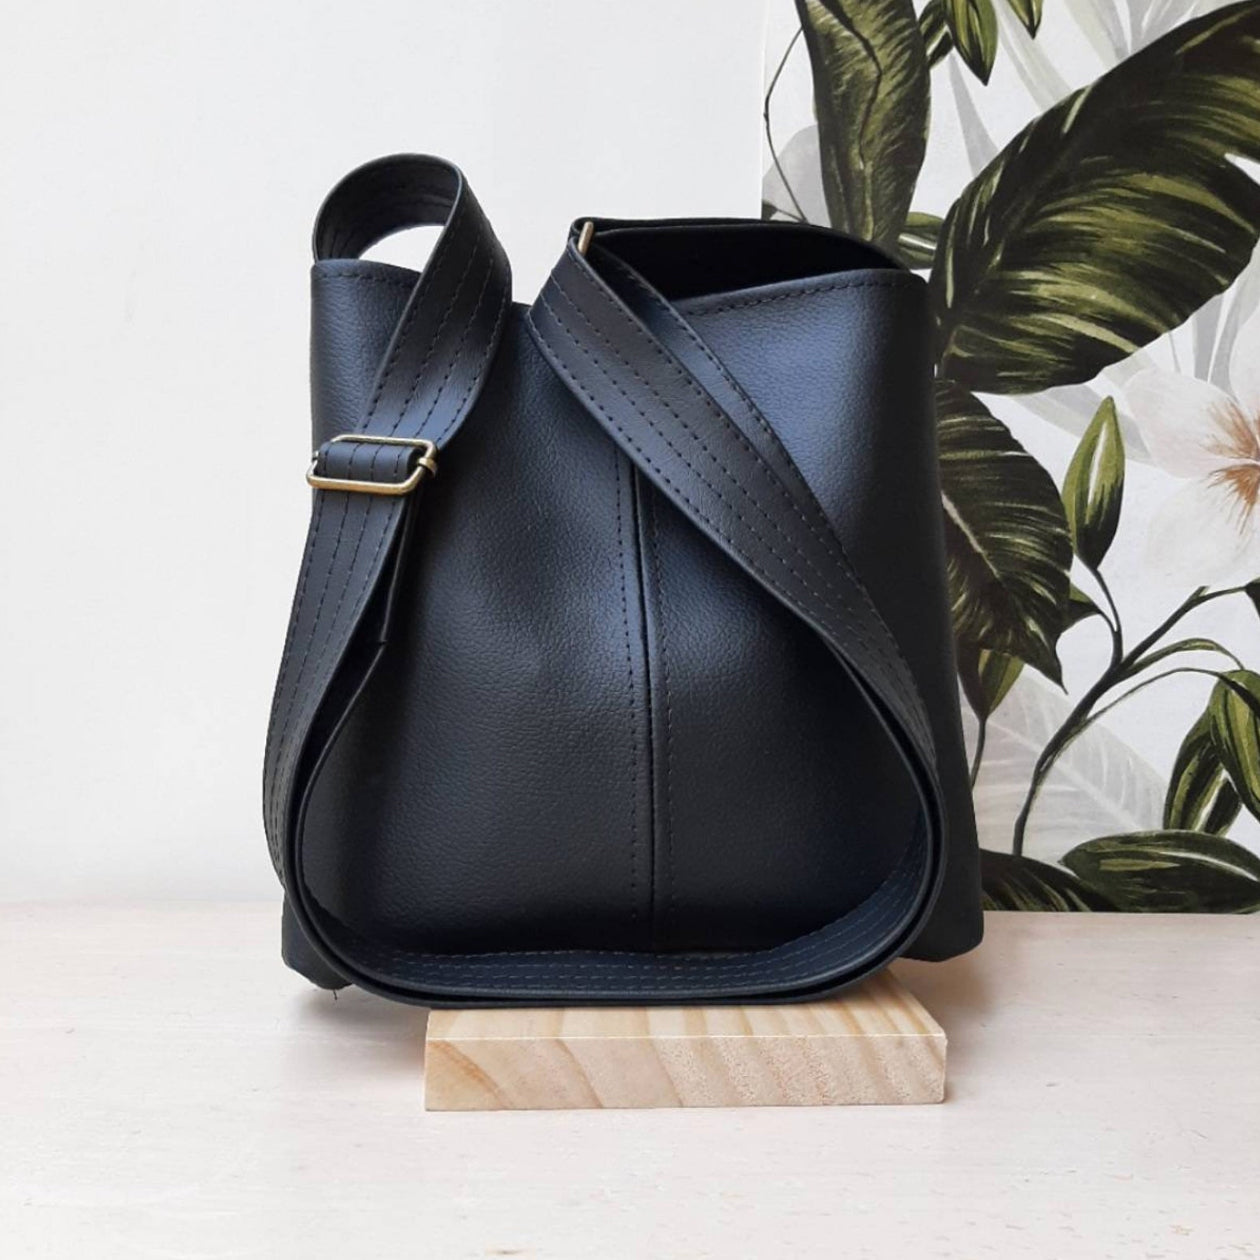 Vegan Leather Bag: Ethical and Eco-friendly Bags – OwnMuse